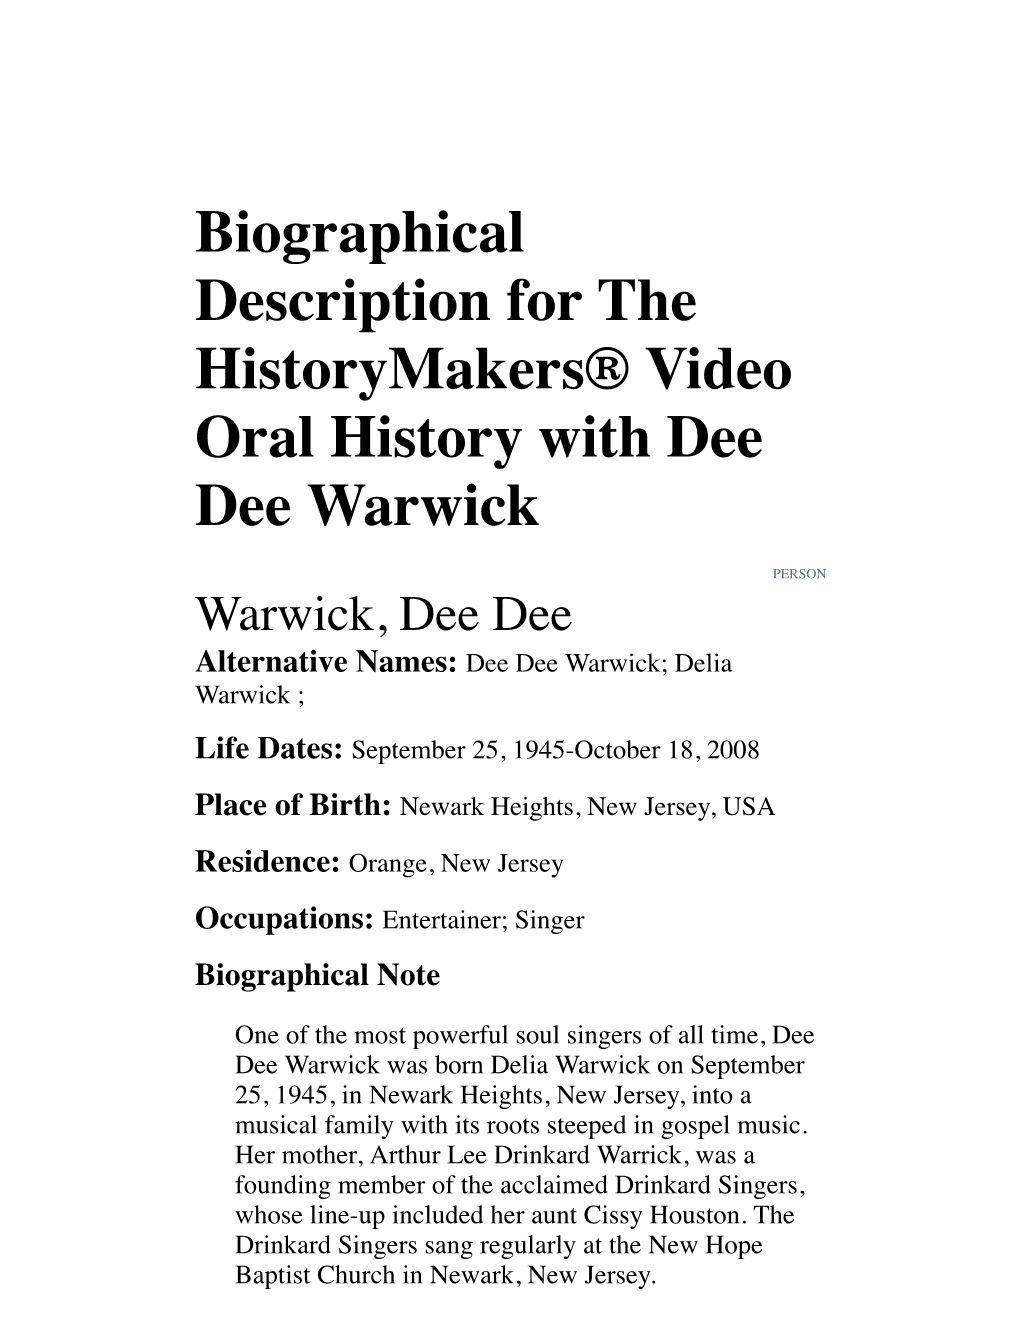 Biographical Description for the Historymakers® Video Oral History with Dee Dee Warwick